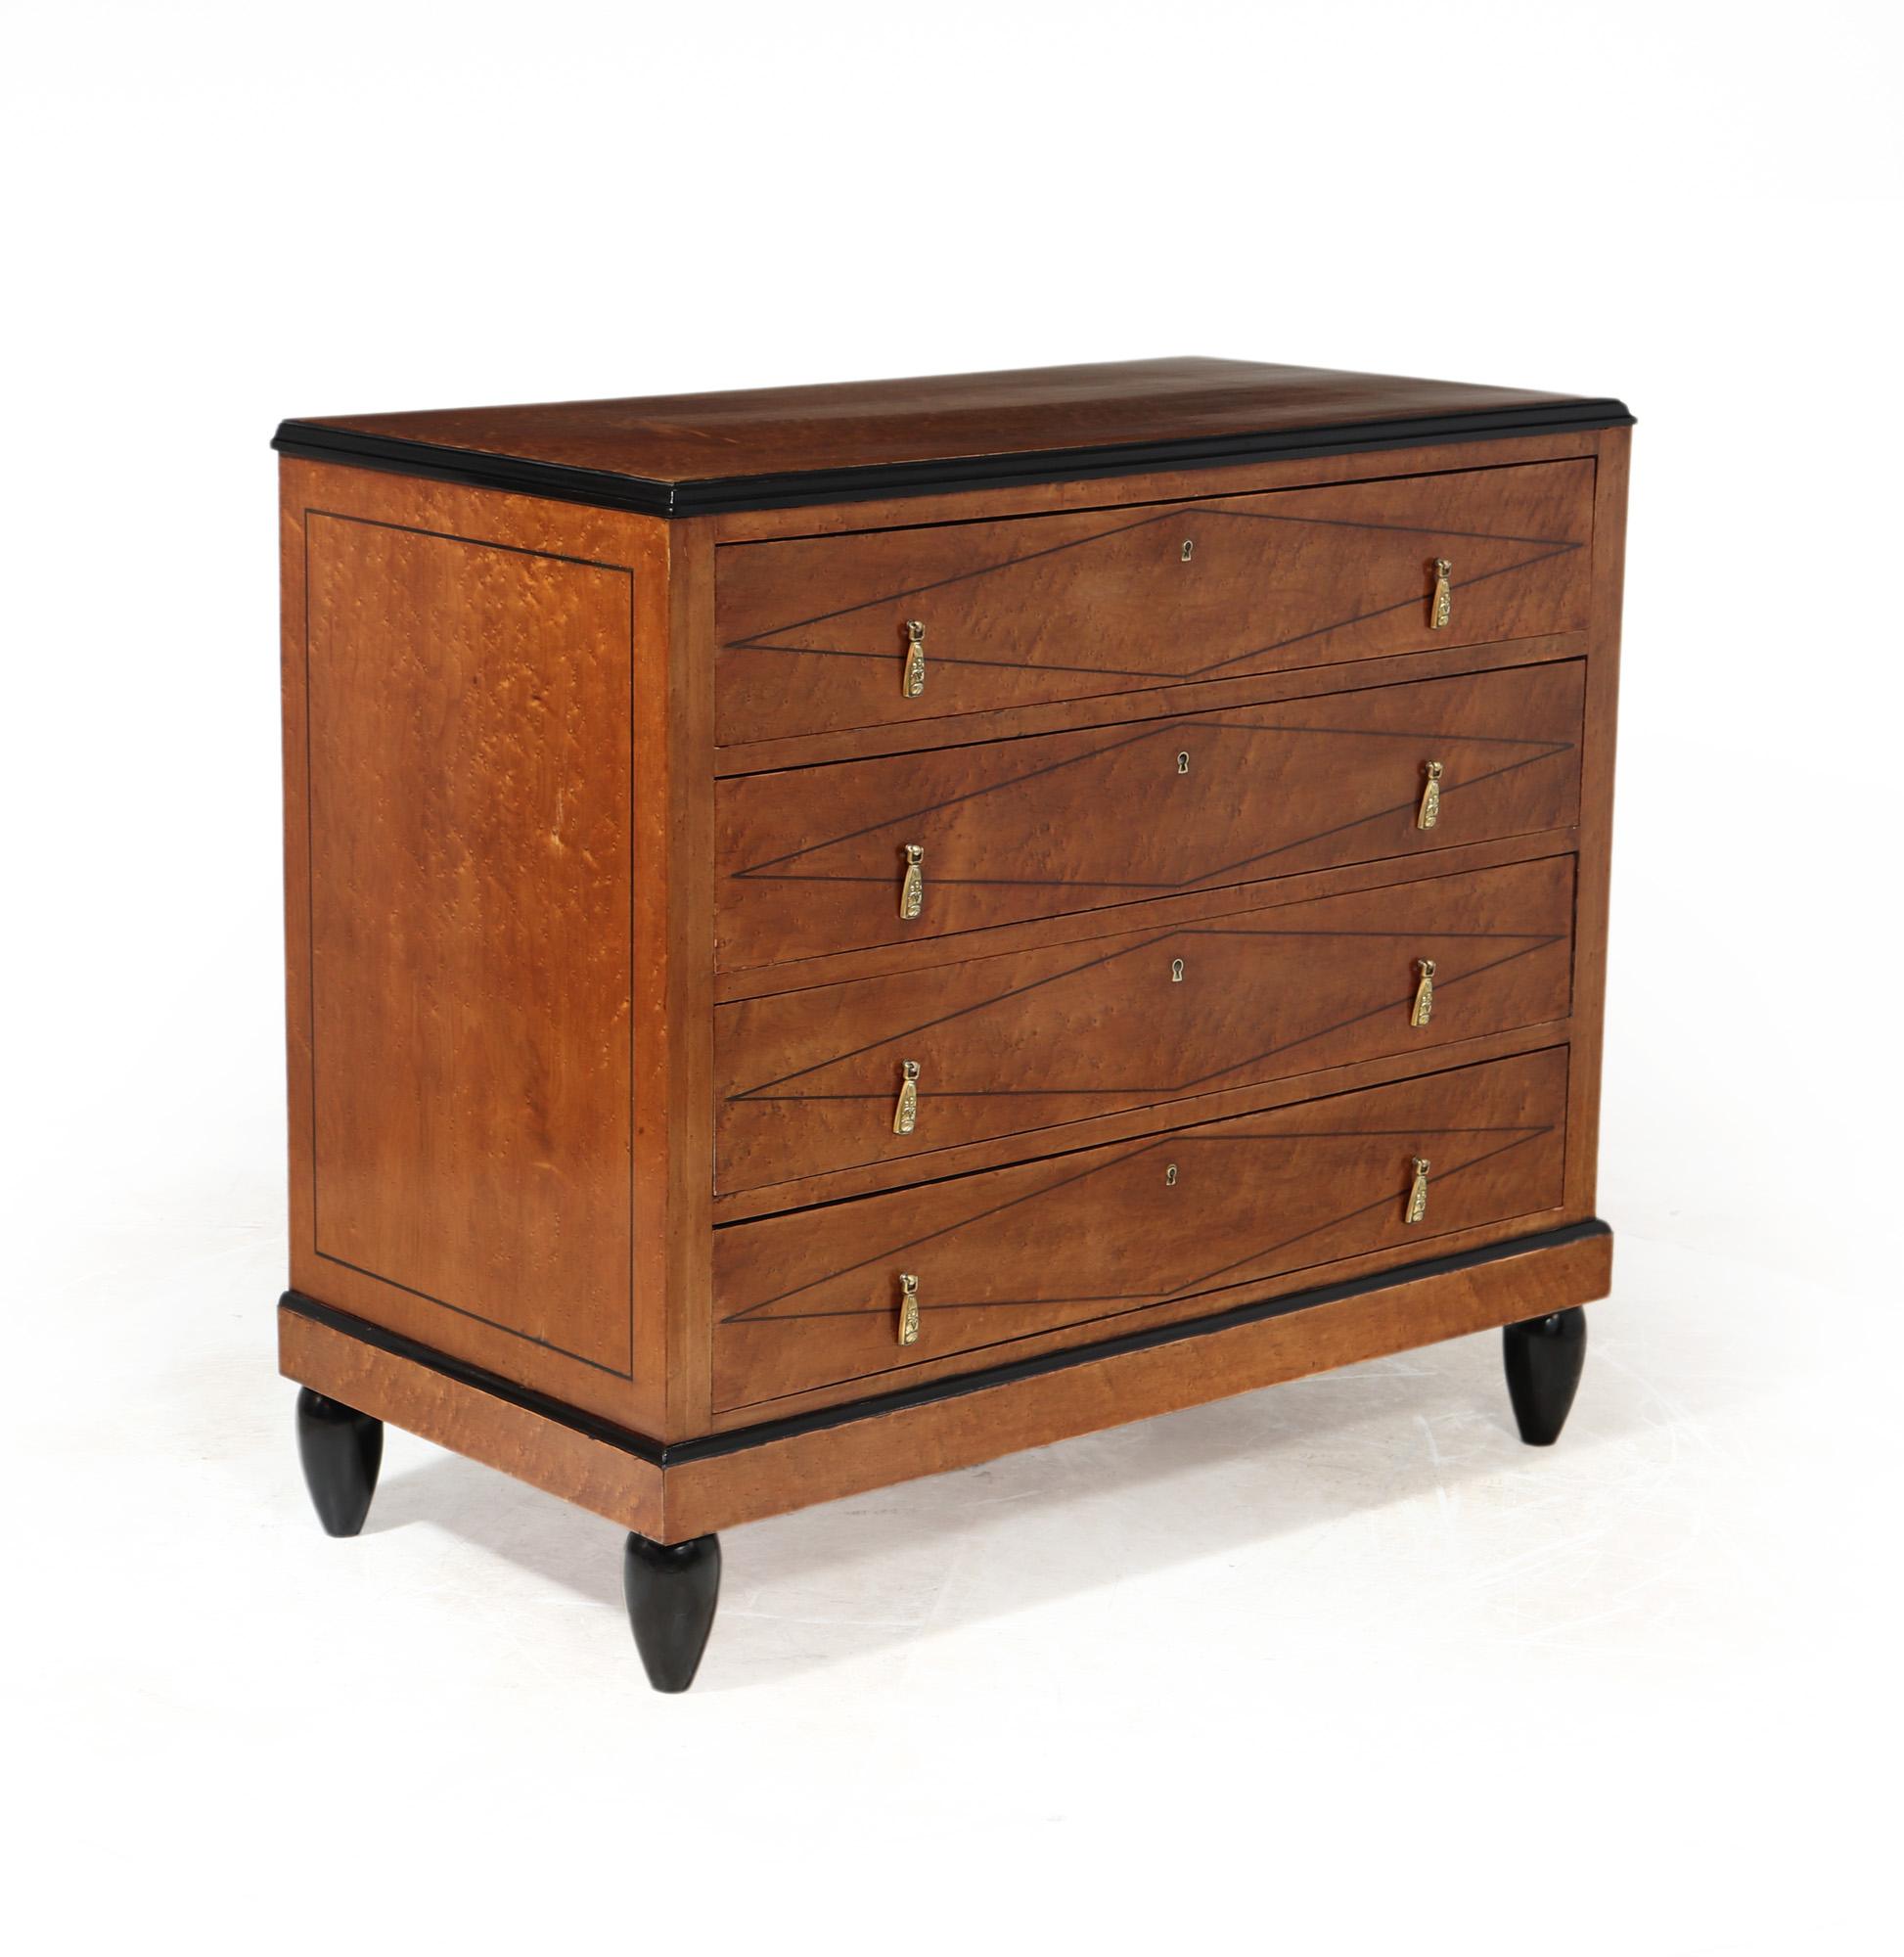 French Art Deco Chest of Drawers in Birds Eye Maple